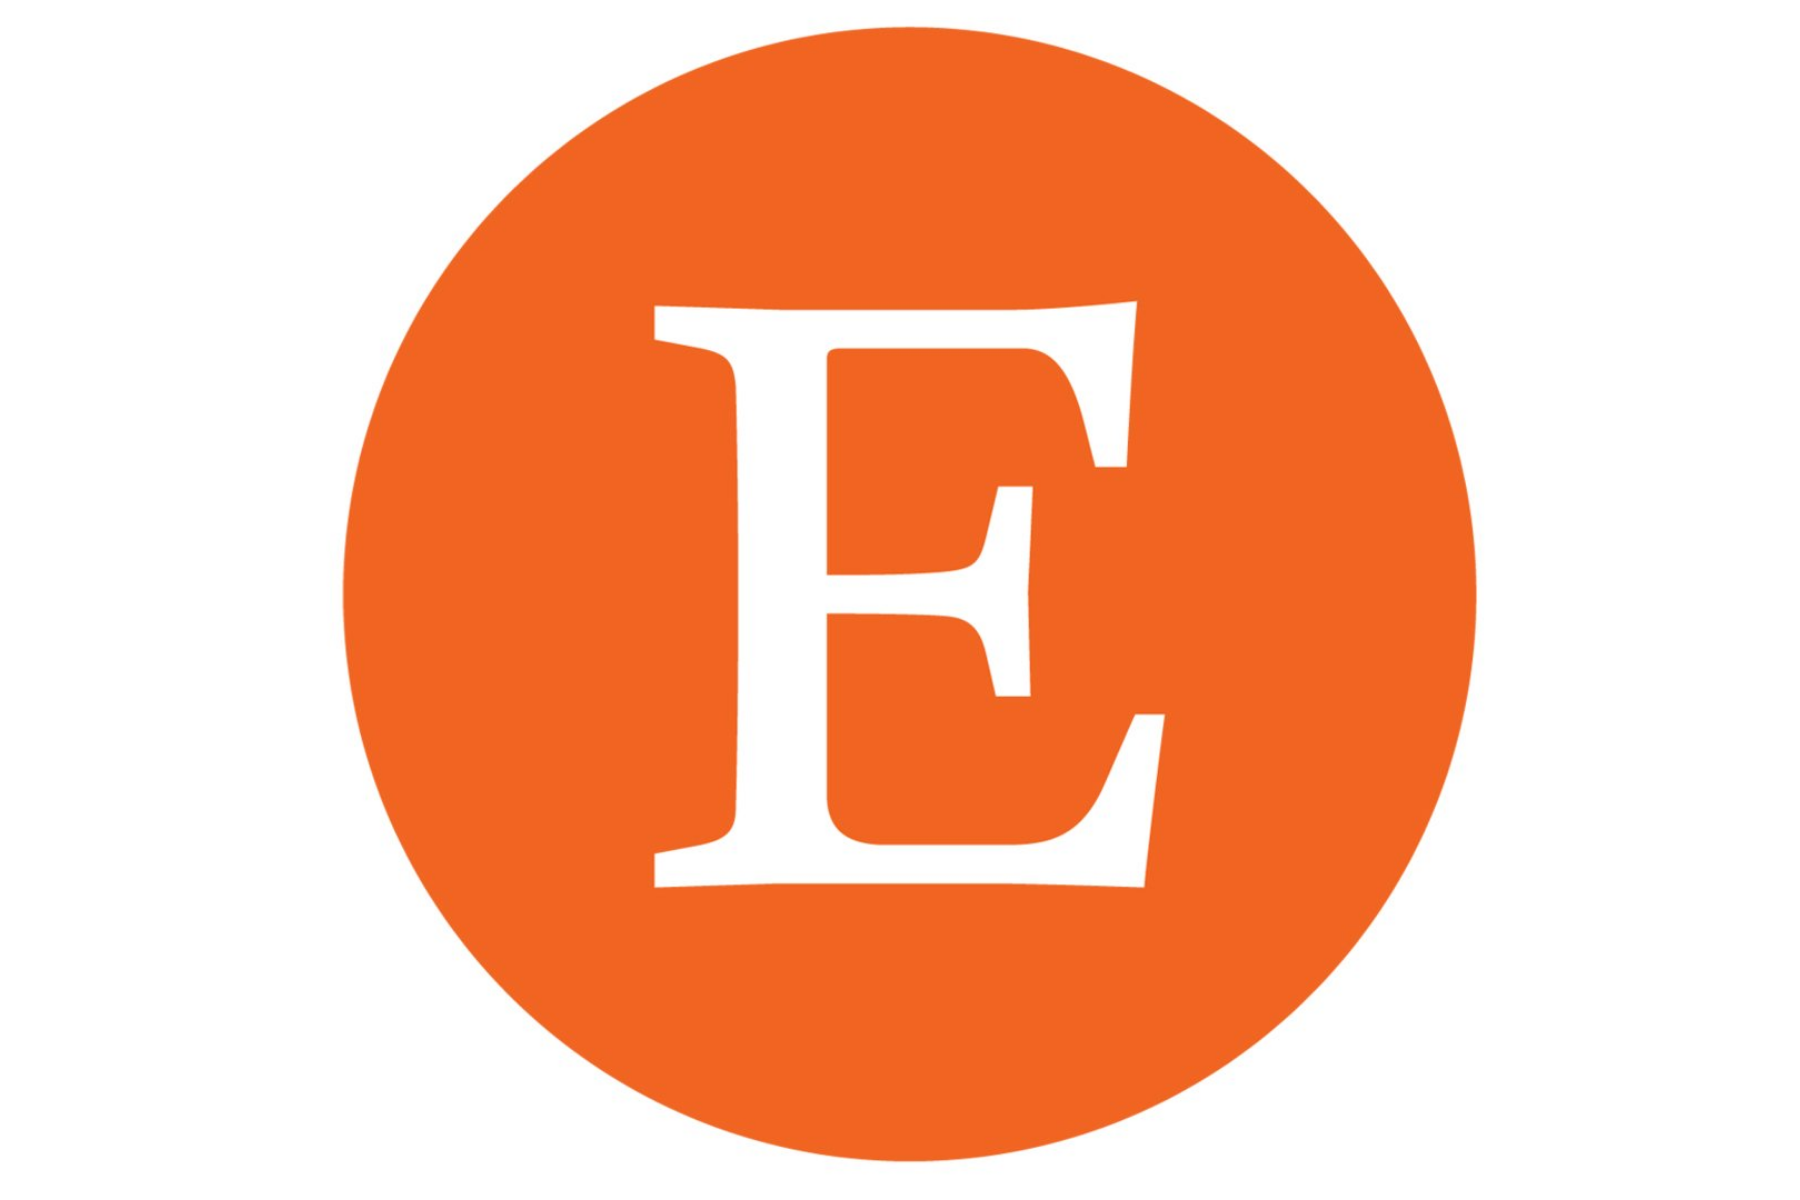 Etsy's logo, with a large letter 'E' inside an orange circle